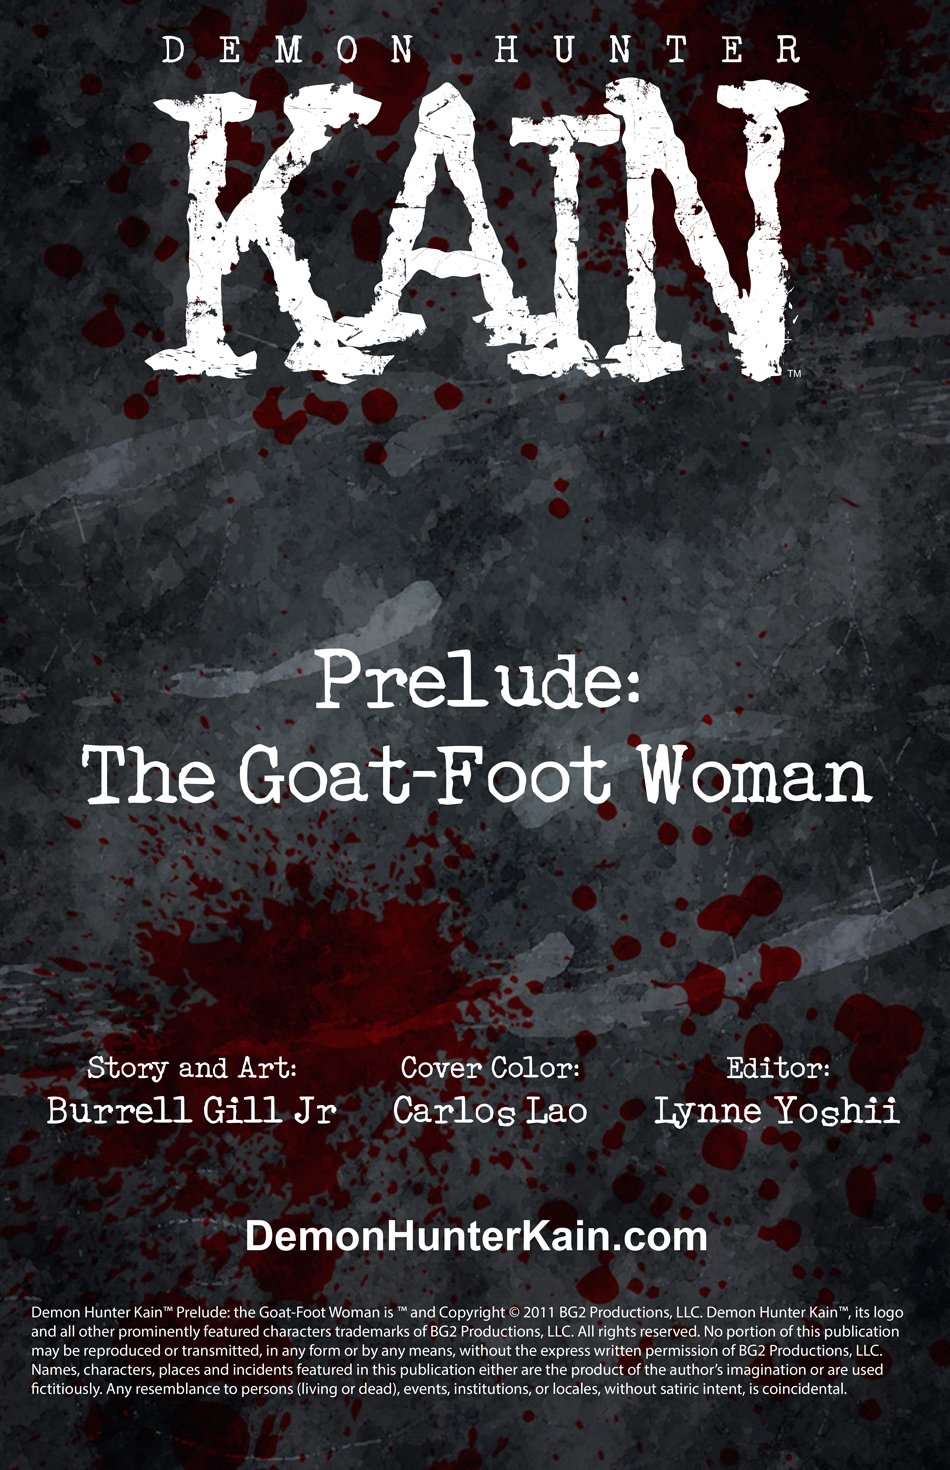 Demon Hunter Kain Prelude: The Goat-Foot Woman Credits Page